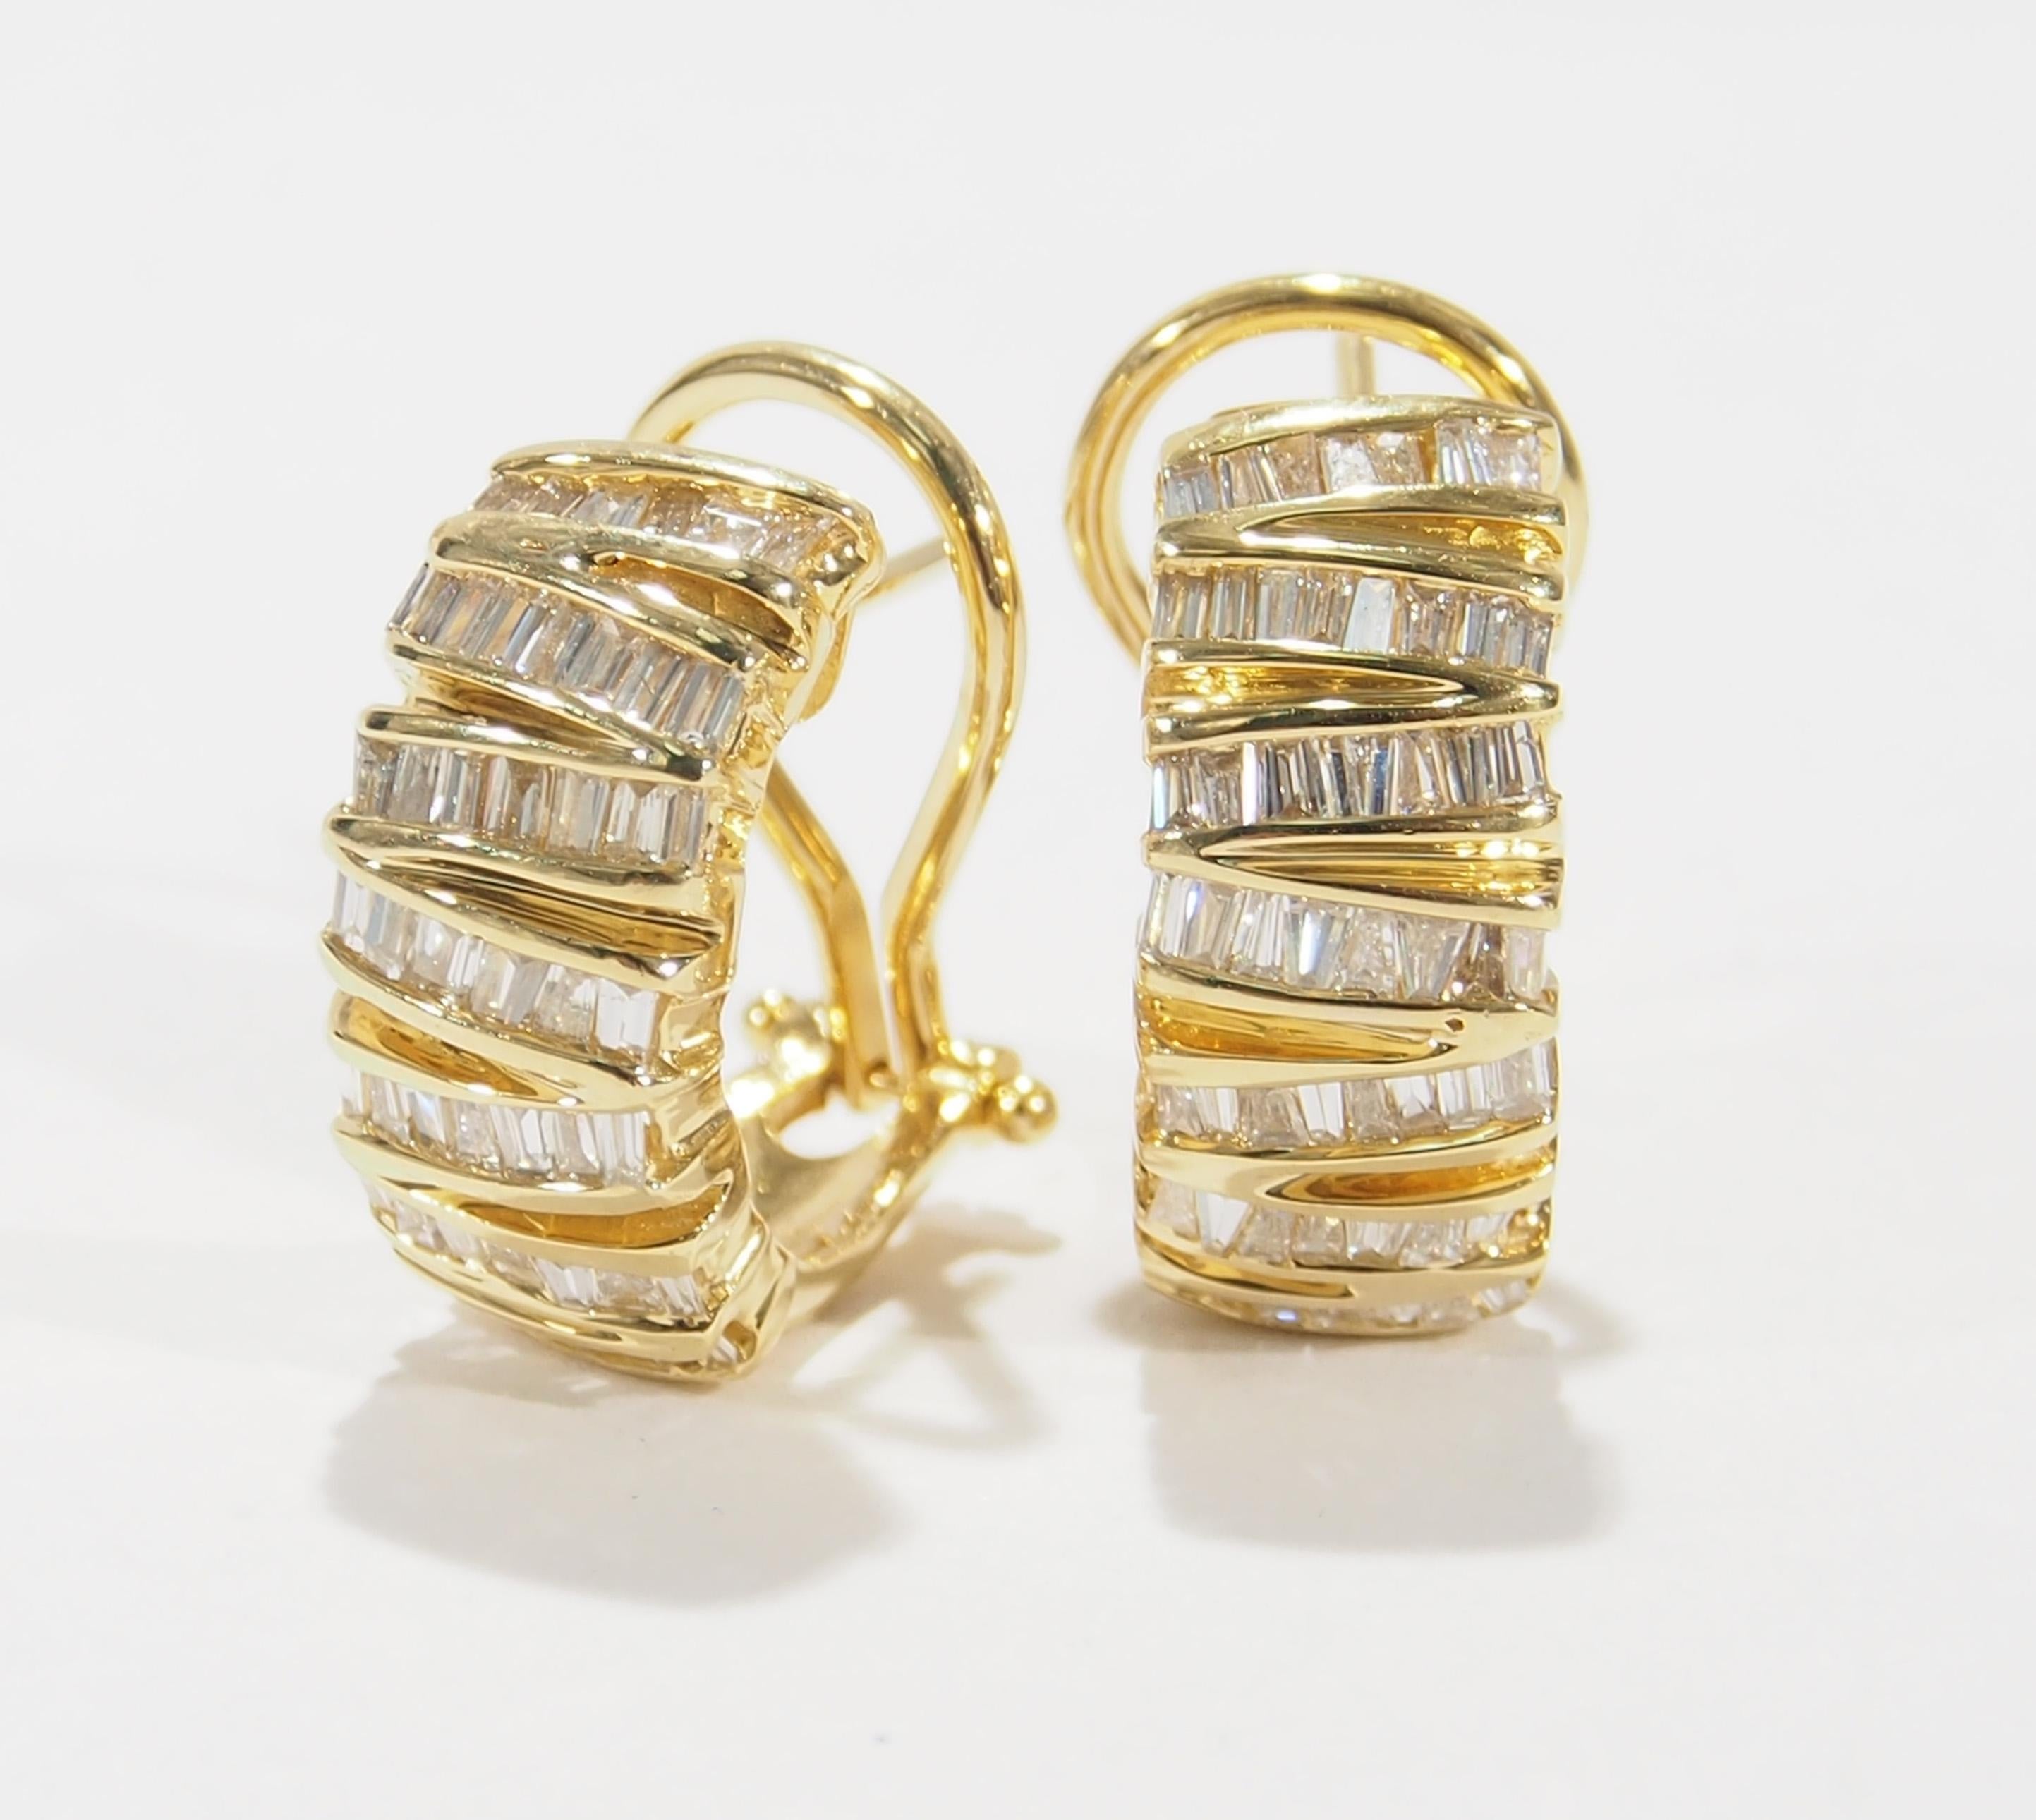 These are a stunning pair of 14K Yellow Gold and Diamond Huggie Style Earrings. The Earrings are 3/4 inch in length and 1/4 inch in width with (94) Baguette Diamonds, approximately 1.88ctw, G-H in Color, VS-SI in Clarity set artistically between